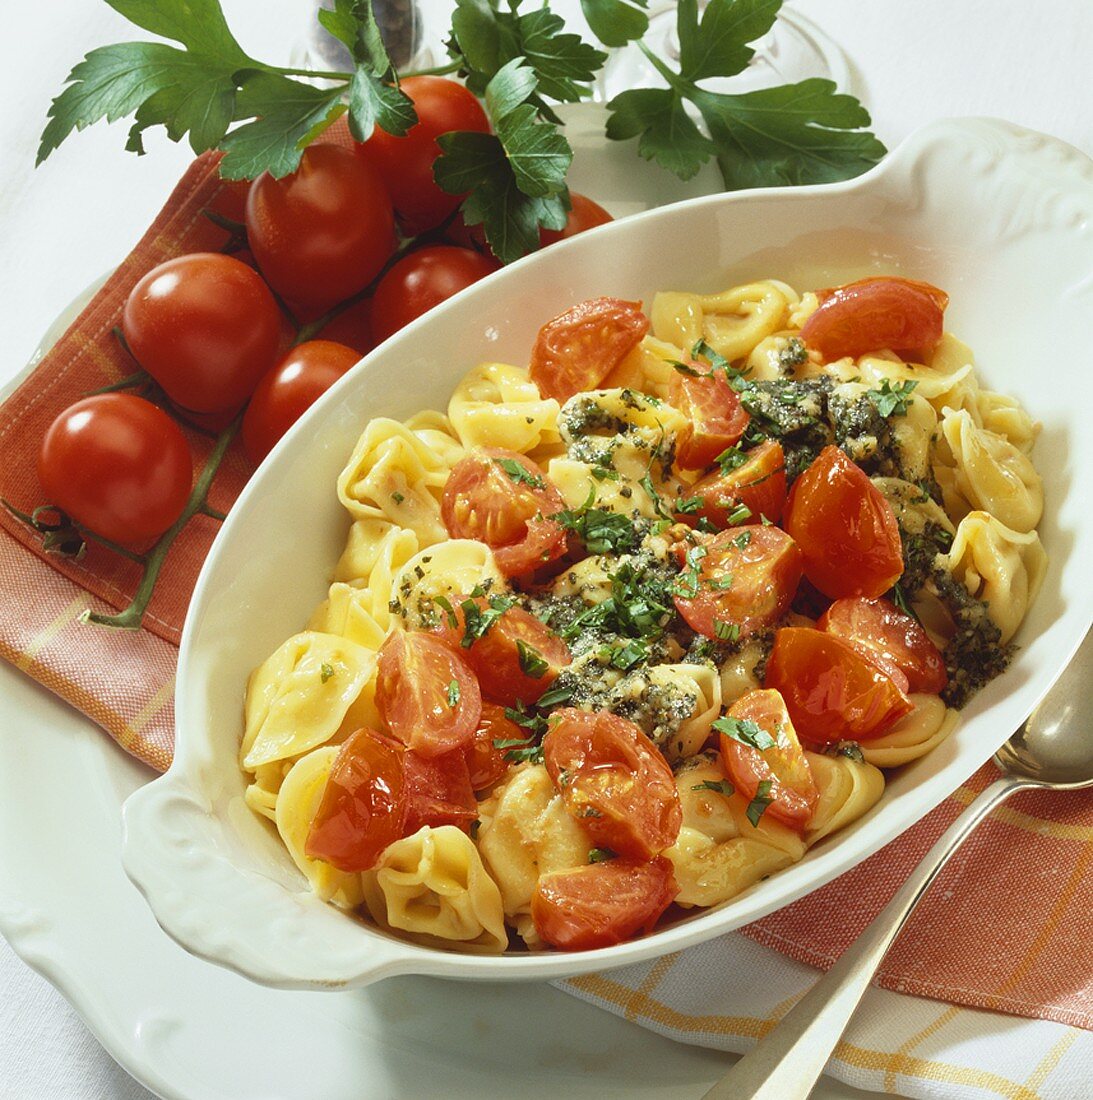 Filled cappalletti (hat-shaped pasta) with butter & tomatoes